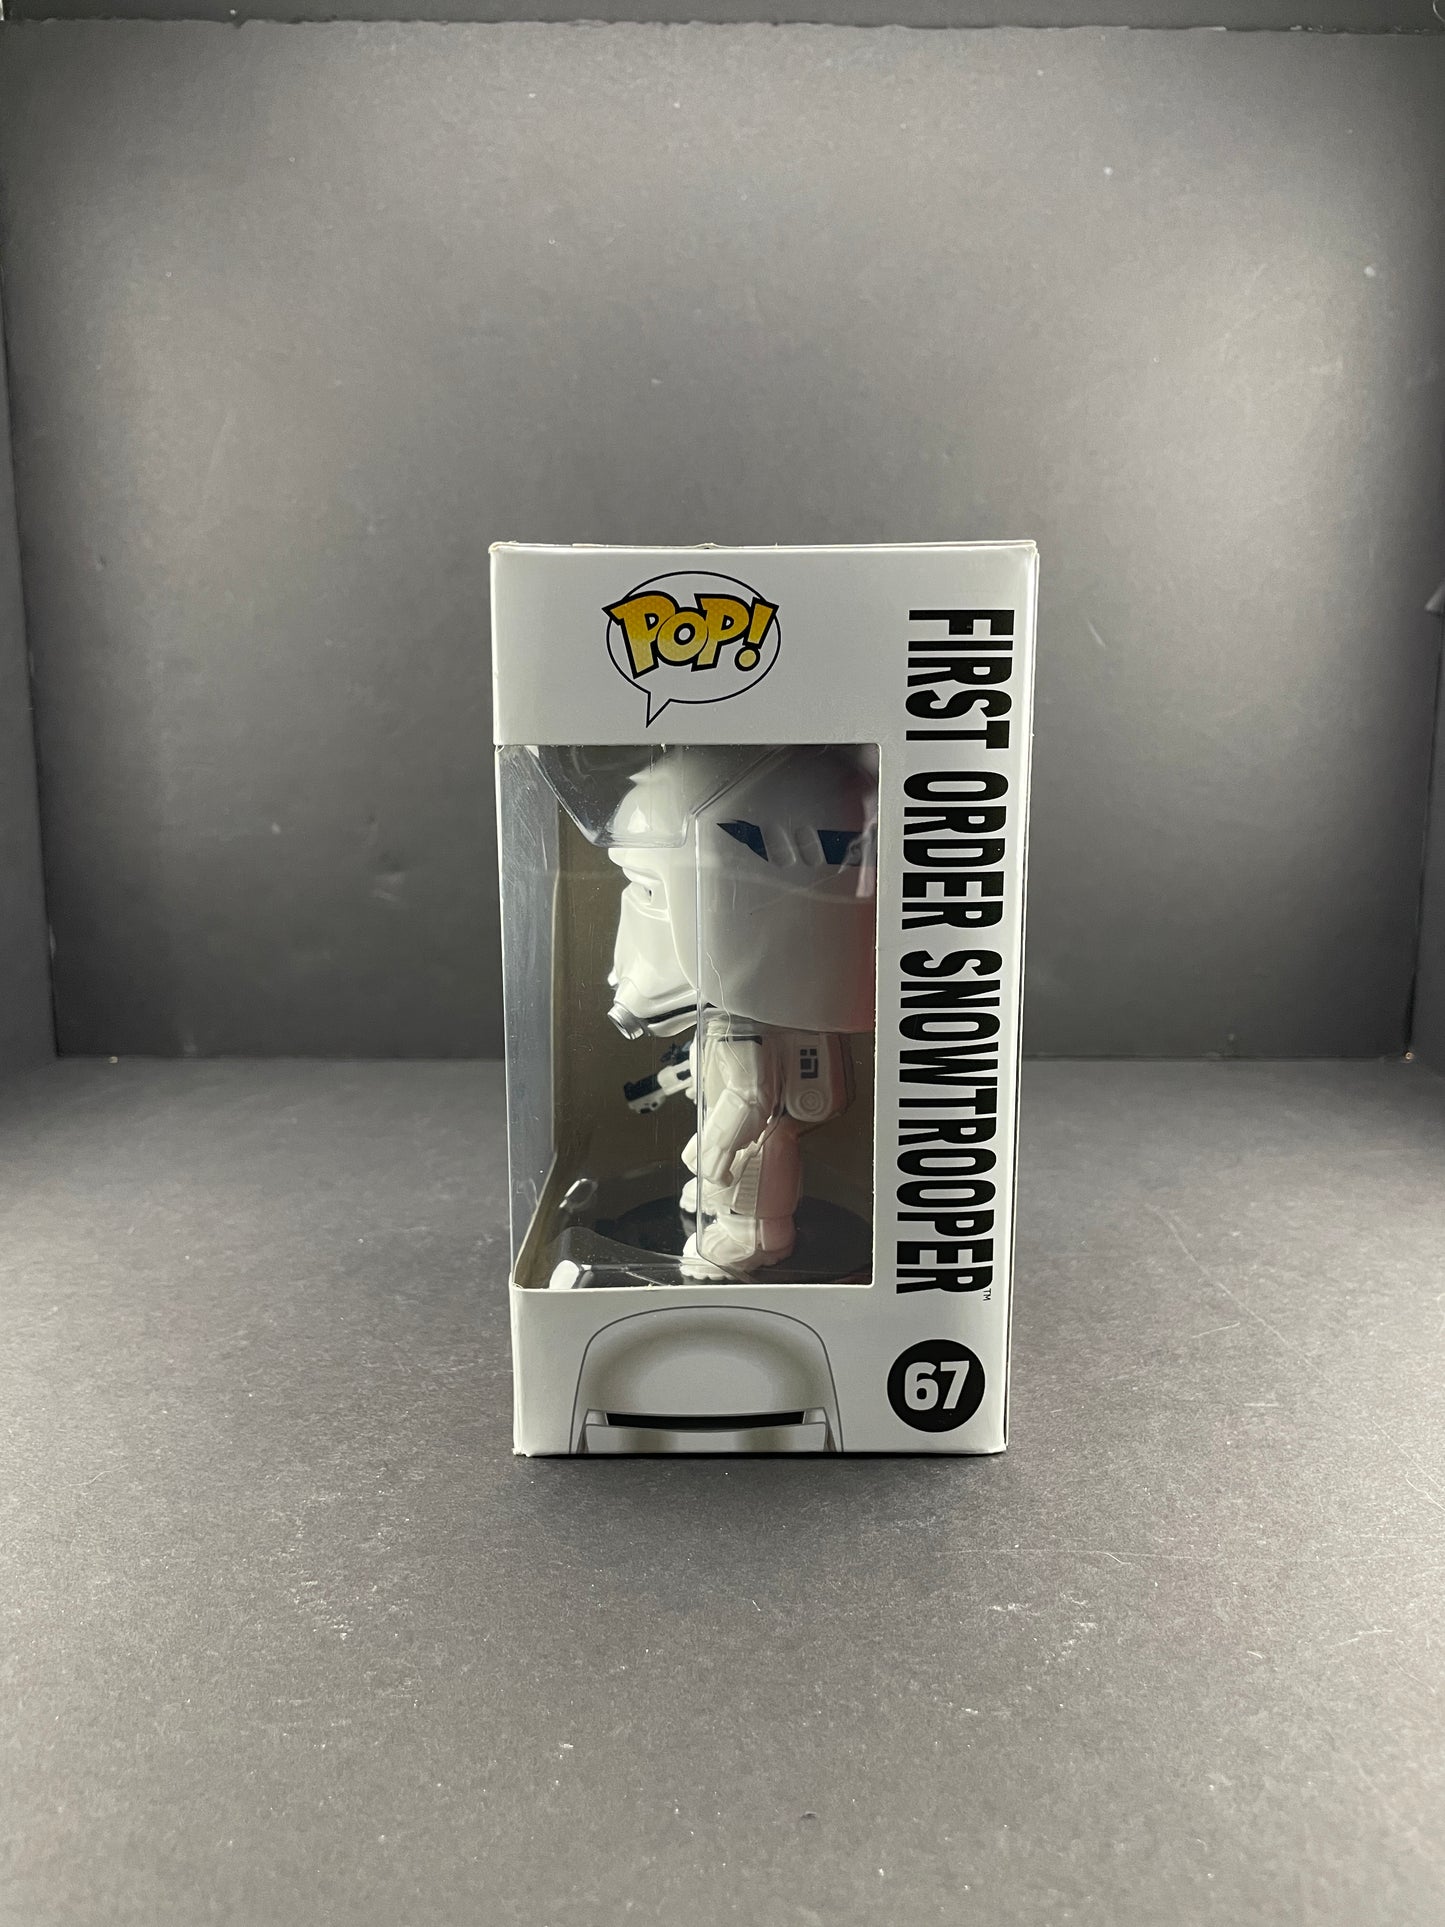 First Order Snowtrooper #67